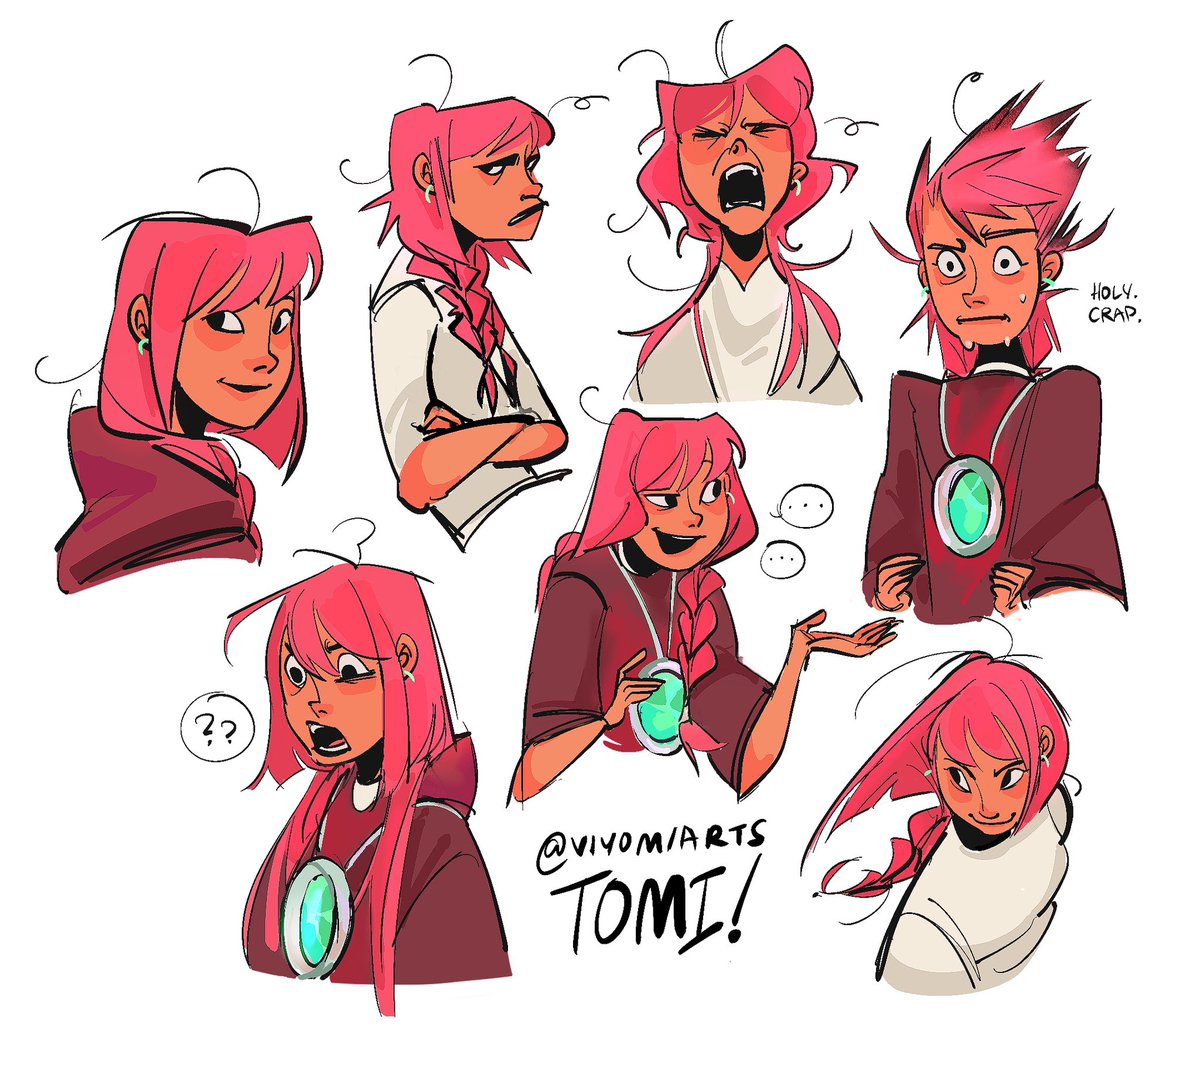 Stuff just to chill ☀️ Tomi concepts! I'll get back to owed art now😎
#visdev #characterdesign